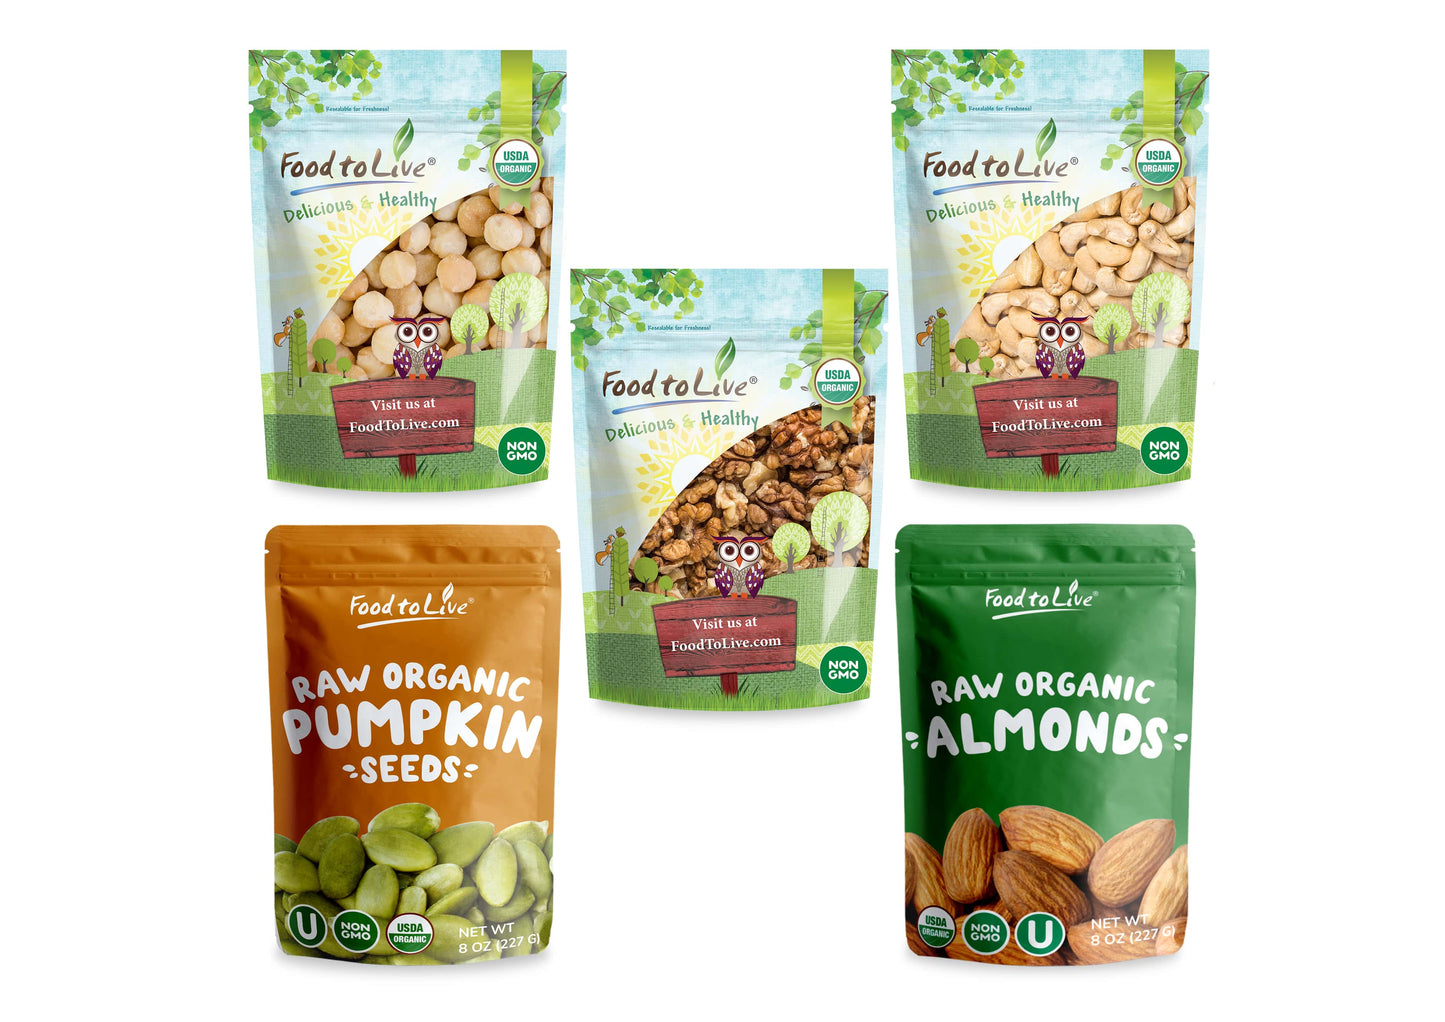 Organic Healthy Nuts & Seeds in a Gift Box - A Variety Pack of Almonds, Walnuts, Cashews, Macadamia Nuts and Pumpkin Seeds -by Food to Live